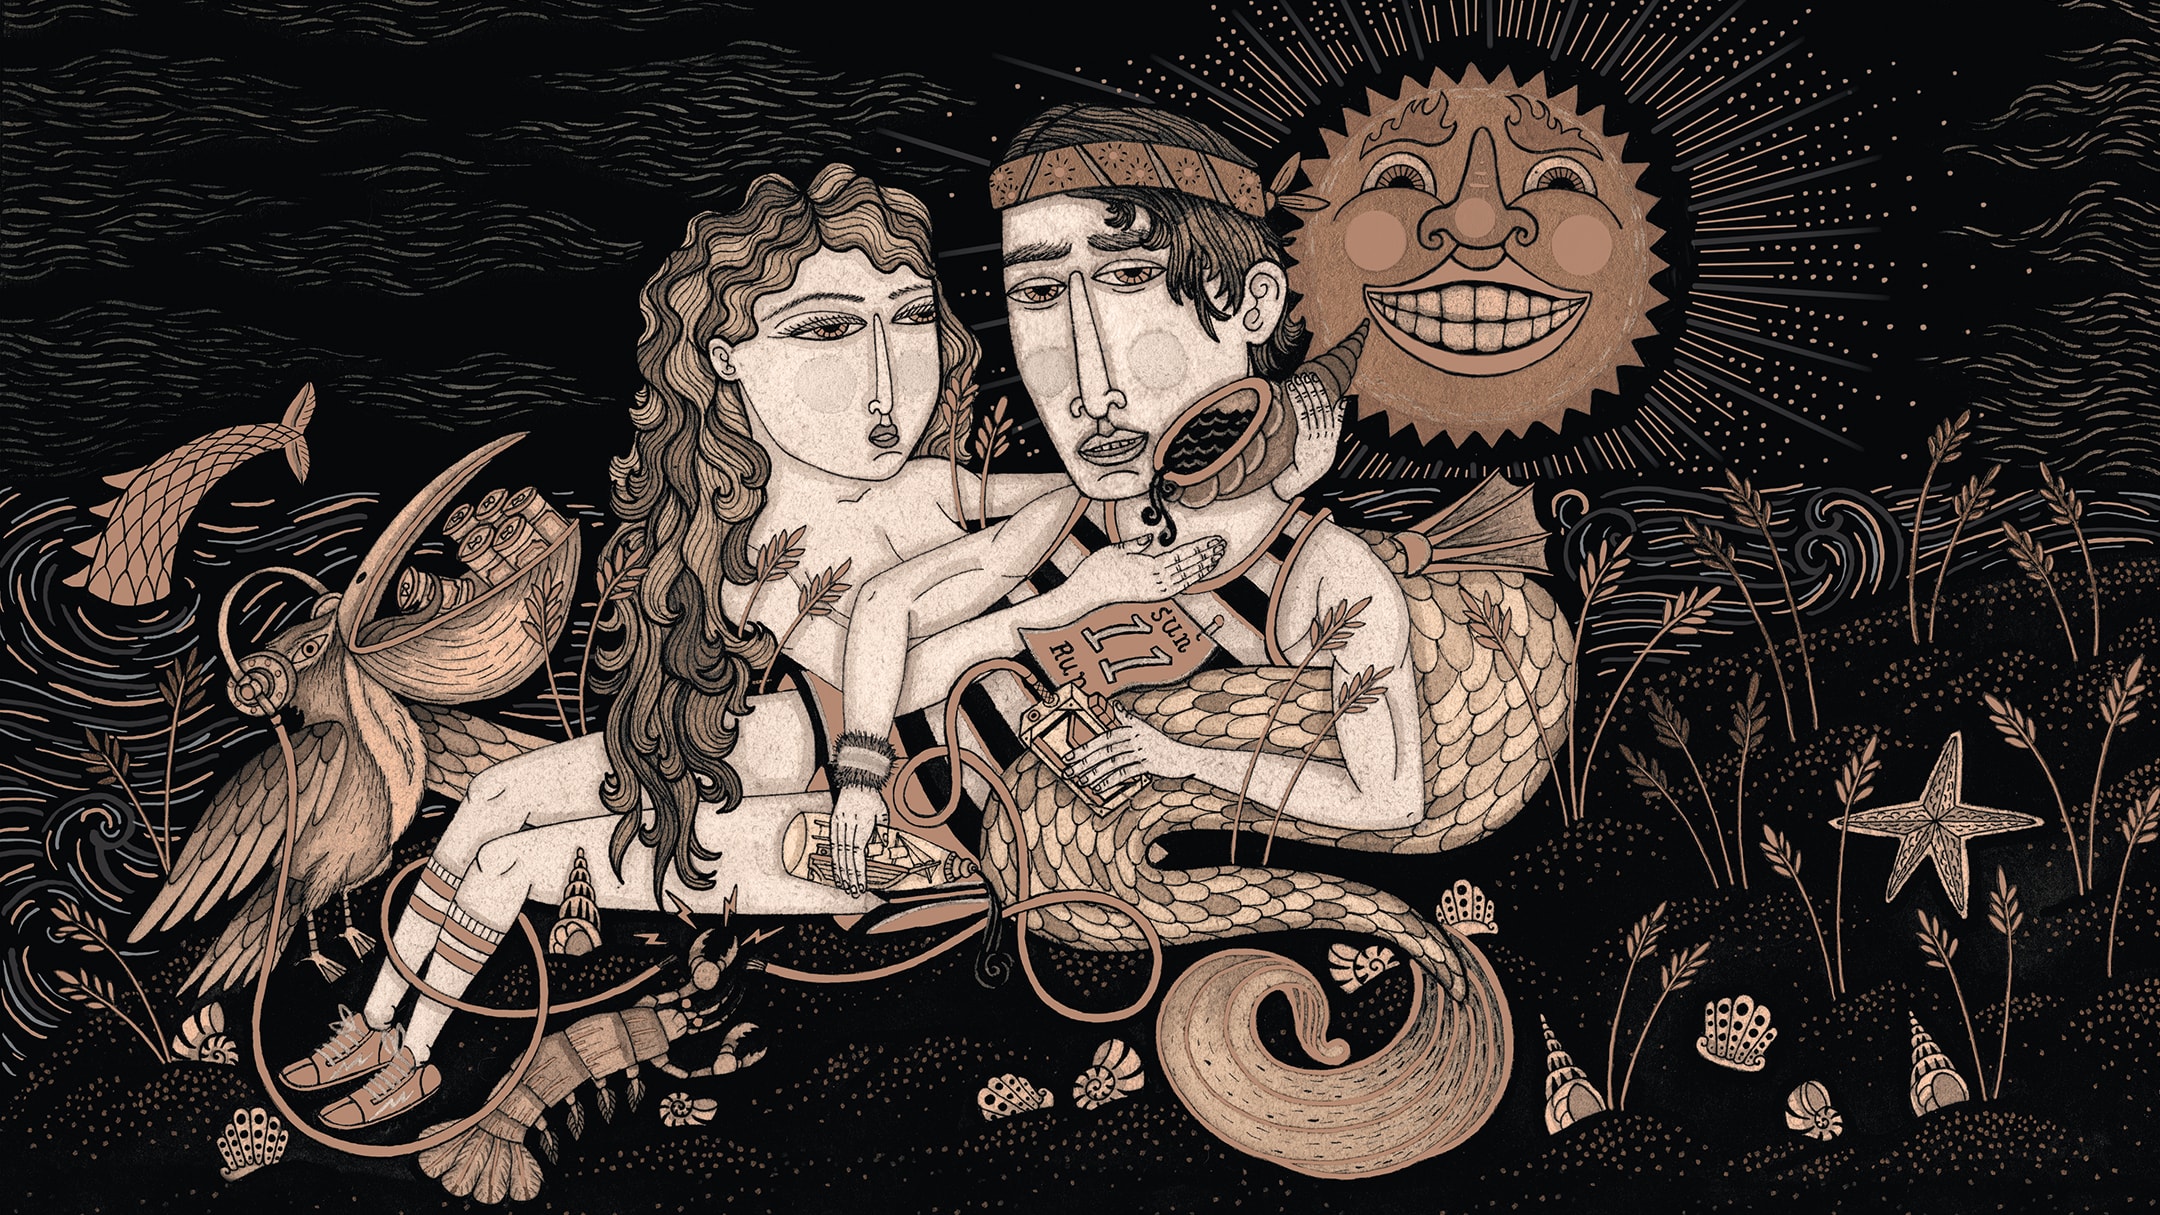 Illustrations used for Coppertail Beer Bottle Design and packaging. Merman and woman featured on Wheat Stroke.